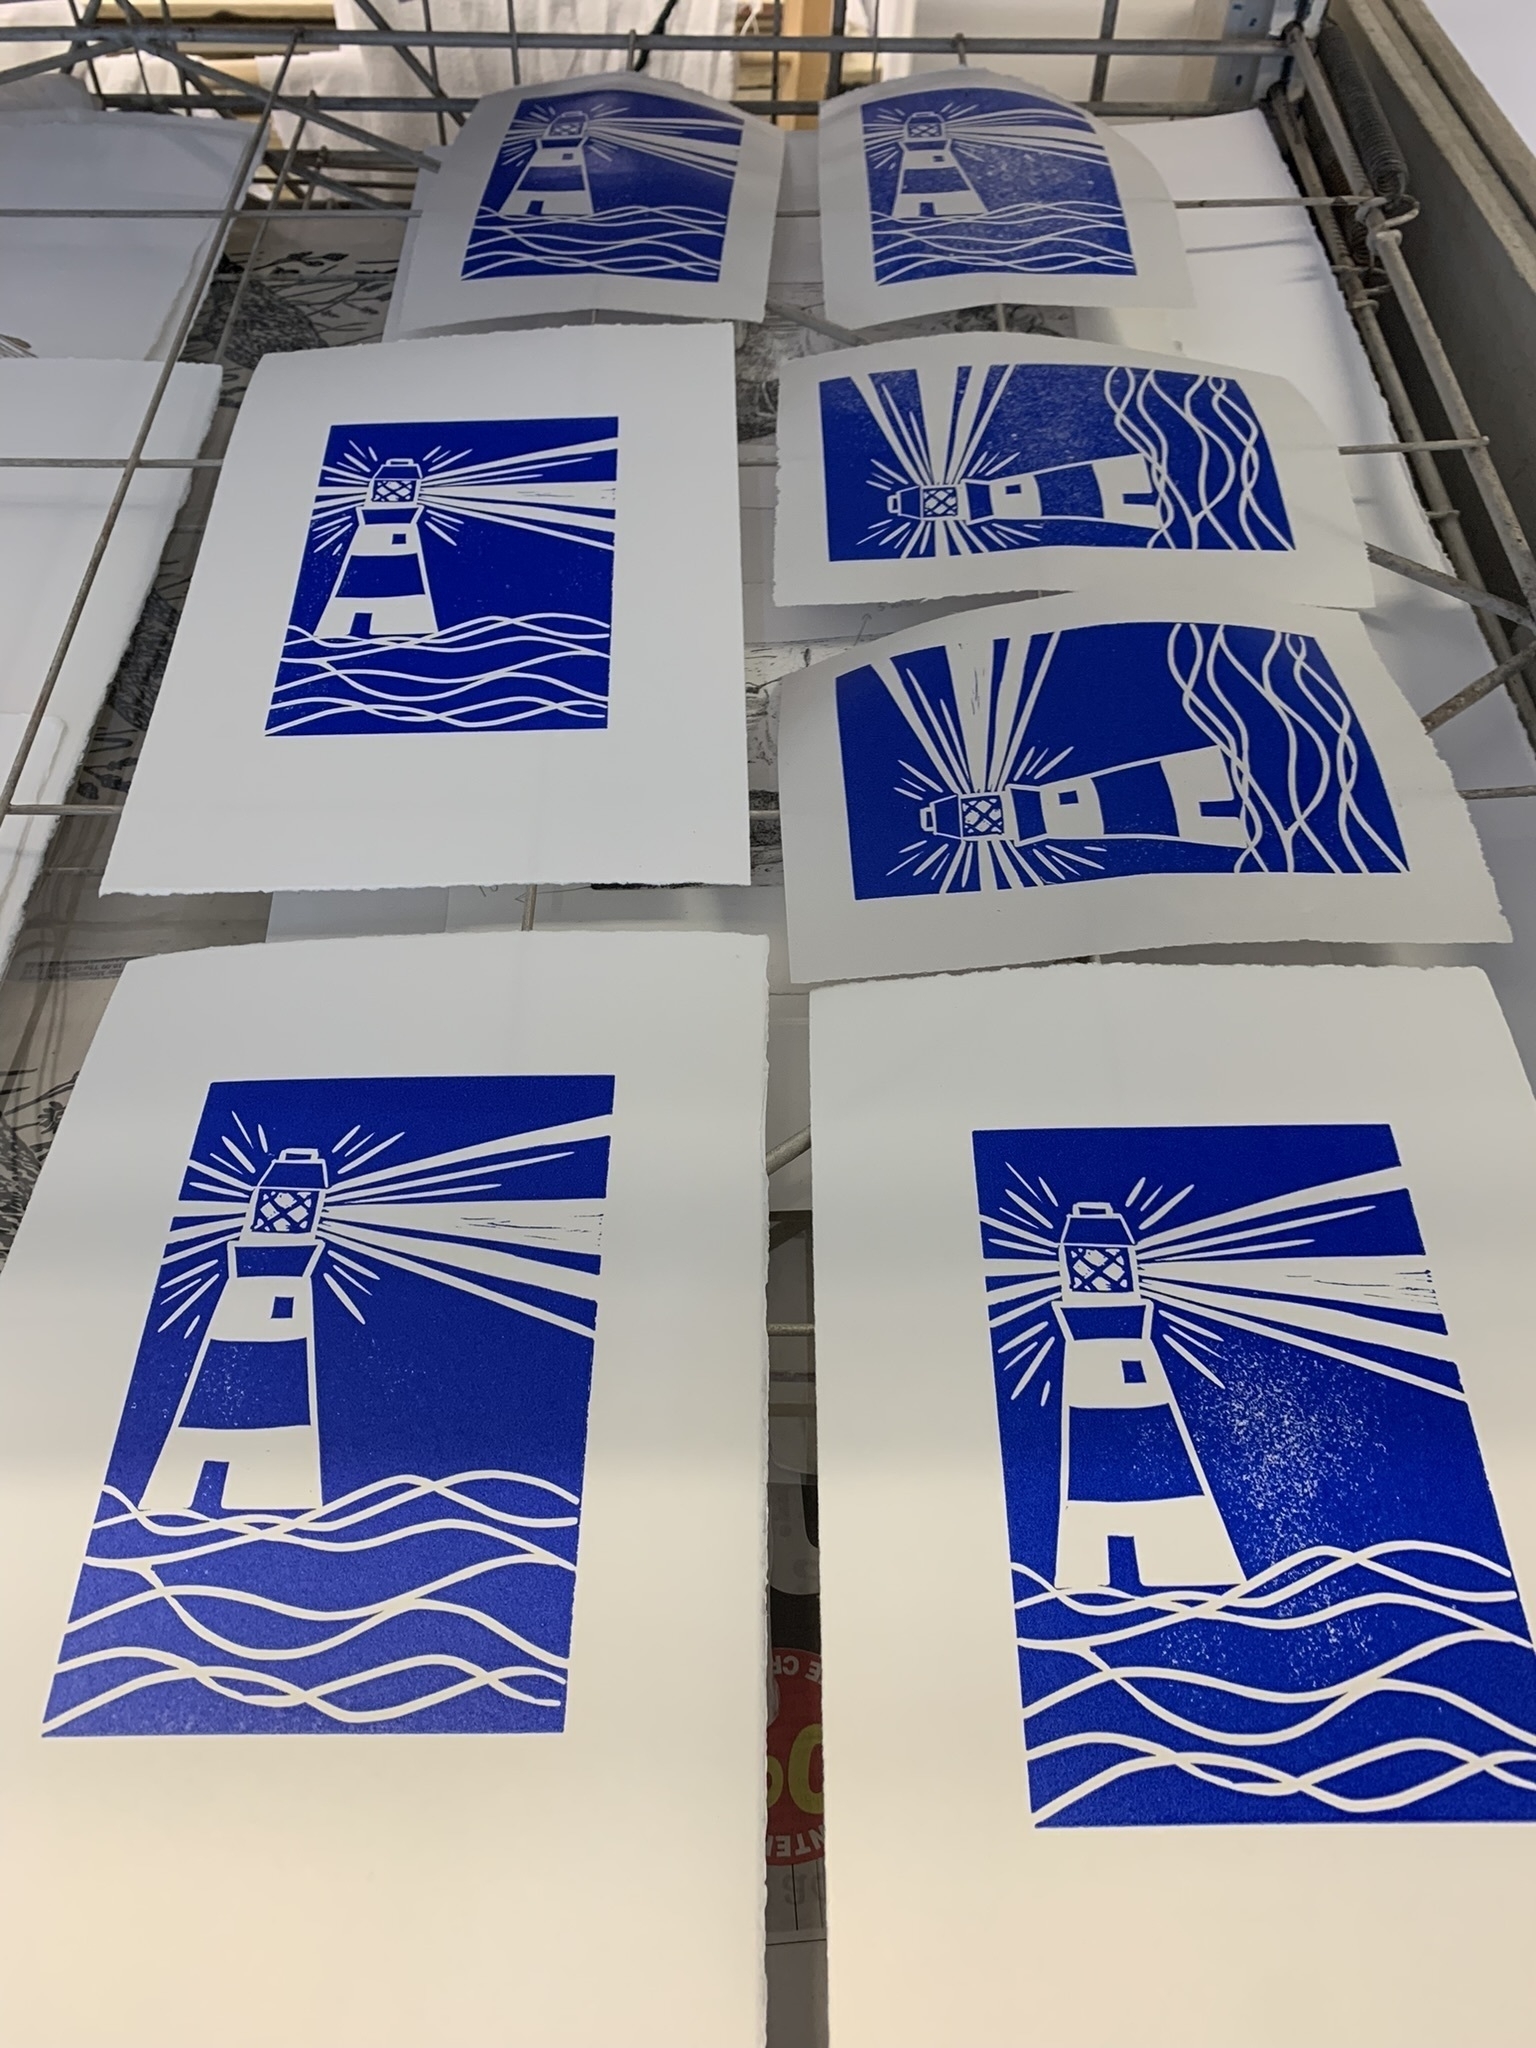 Lino cut prints of a simple lighthouse design in brilliant blue resting on the drying rack.